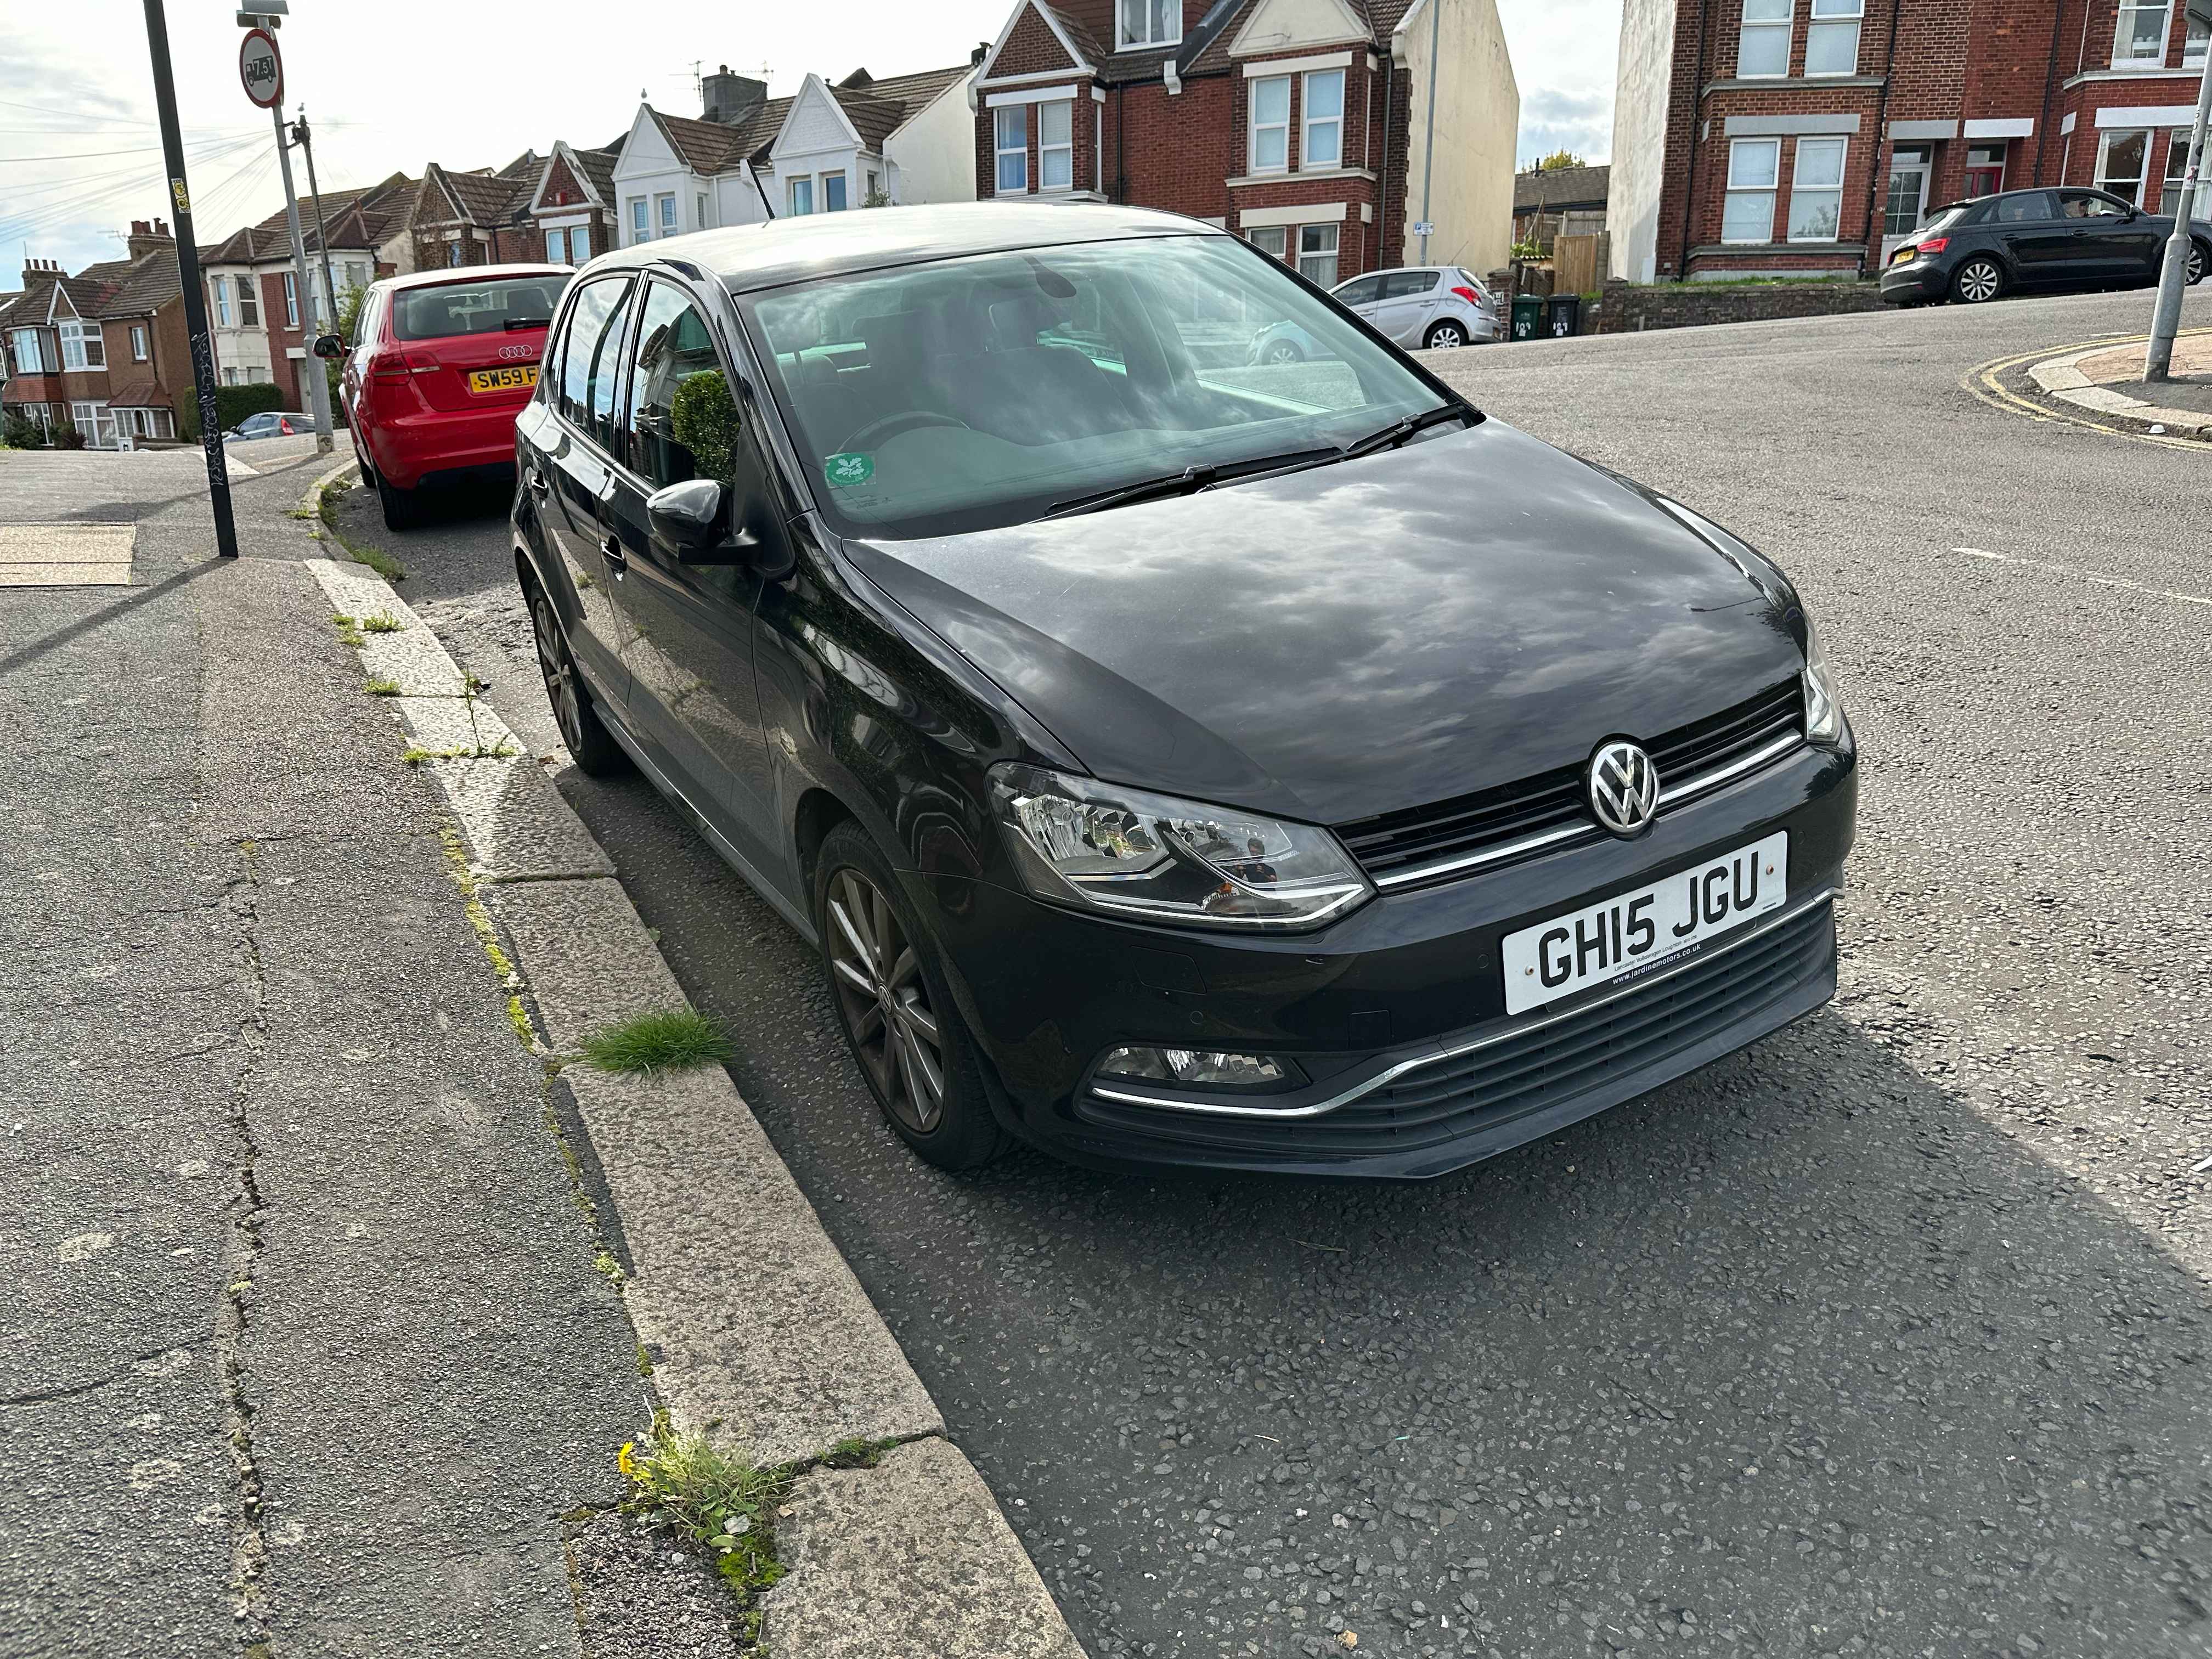 Photograph of GH15 JGU - a Black Volkswagen Polo parked in Hollingdean by a non-resident. The first of three photographs supplied by the residents of Hollingdean.